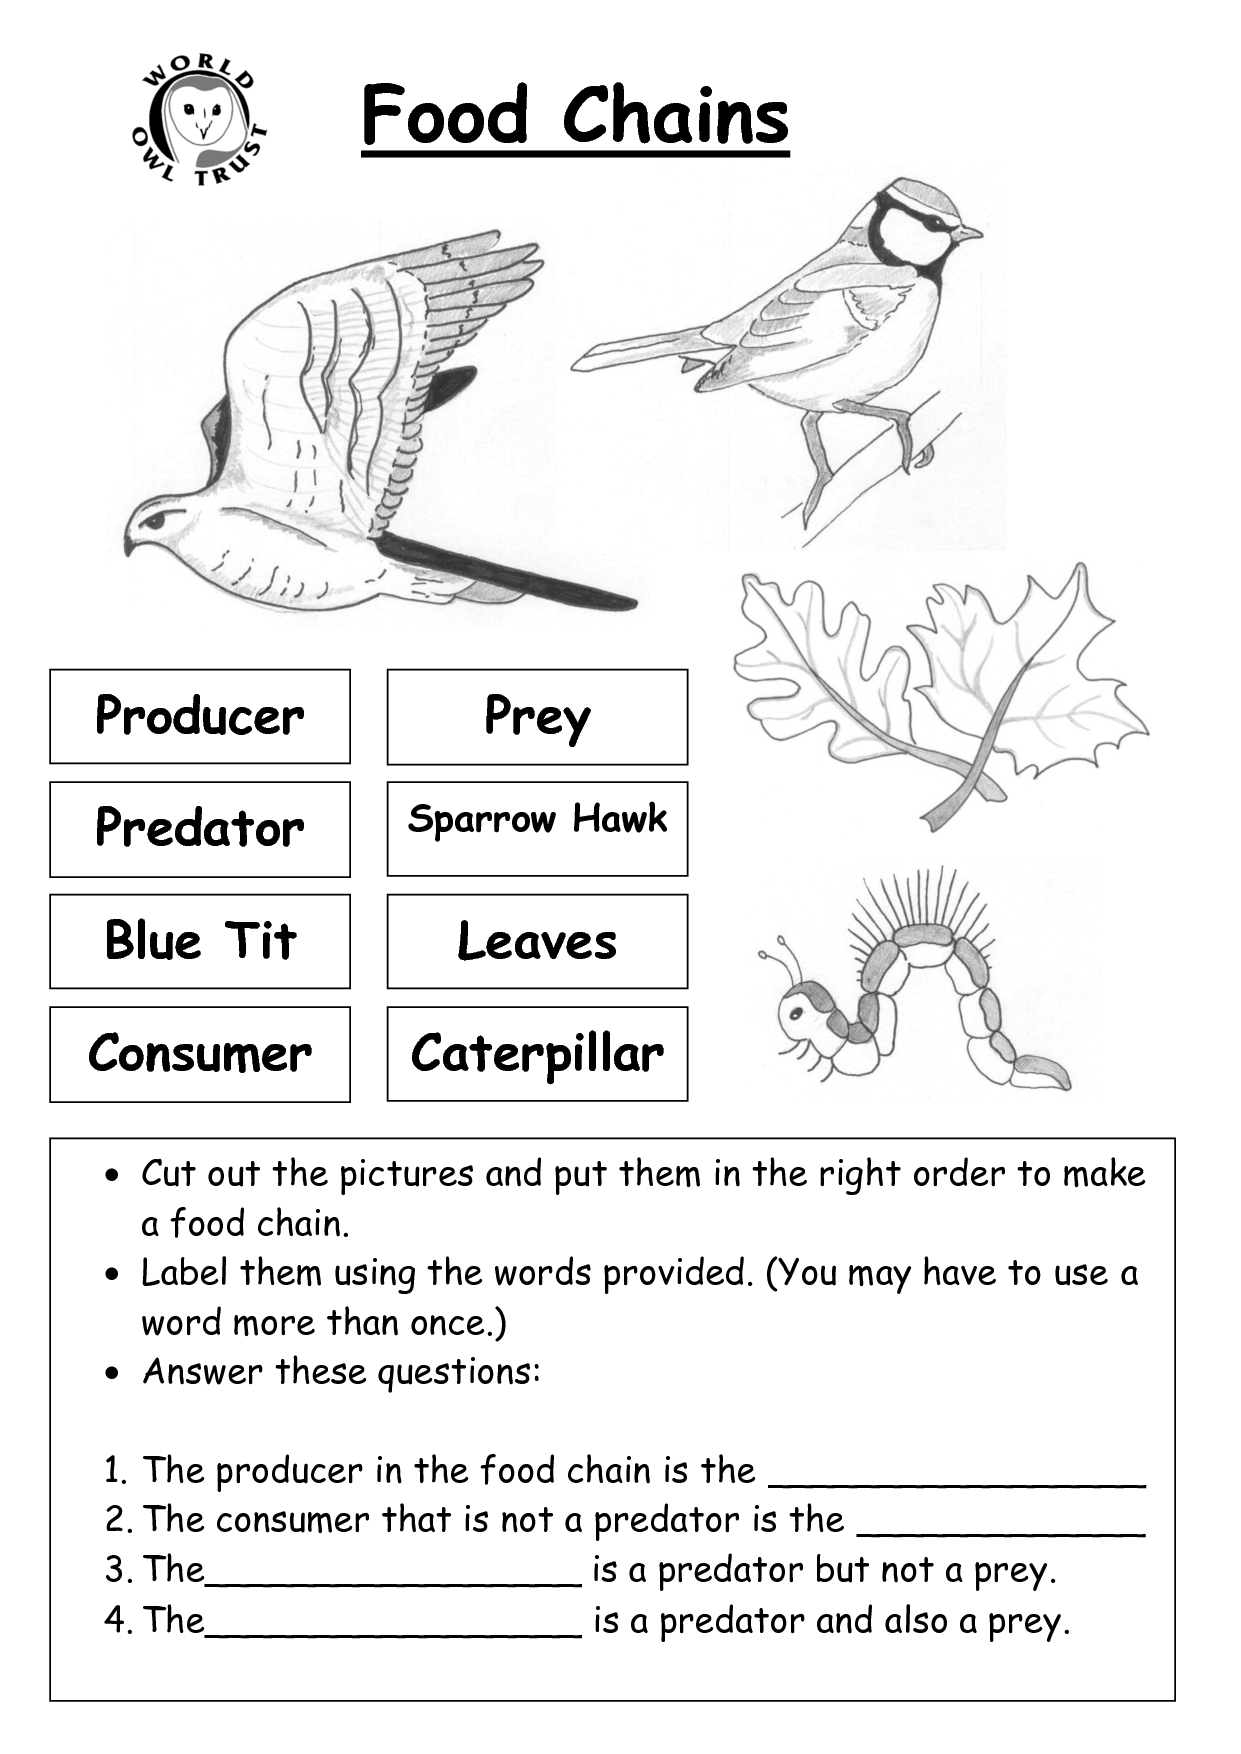 11 Best Images of Food Chain Worksheets 2nd Grade - Food Chain